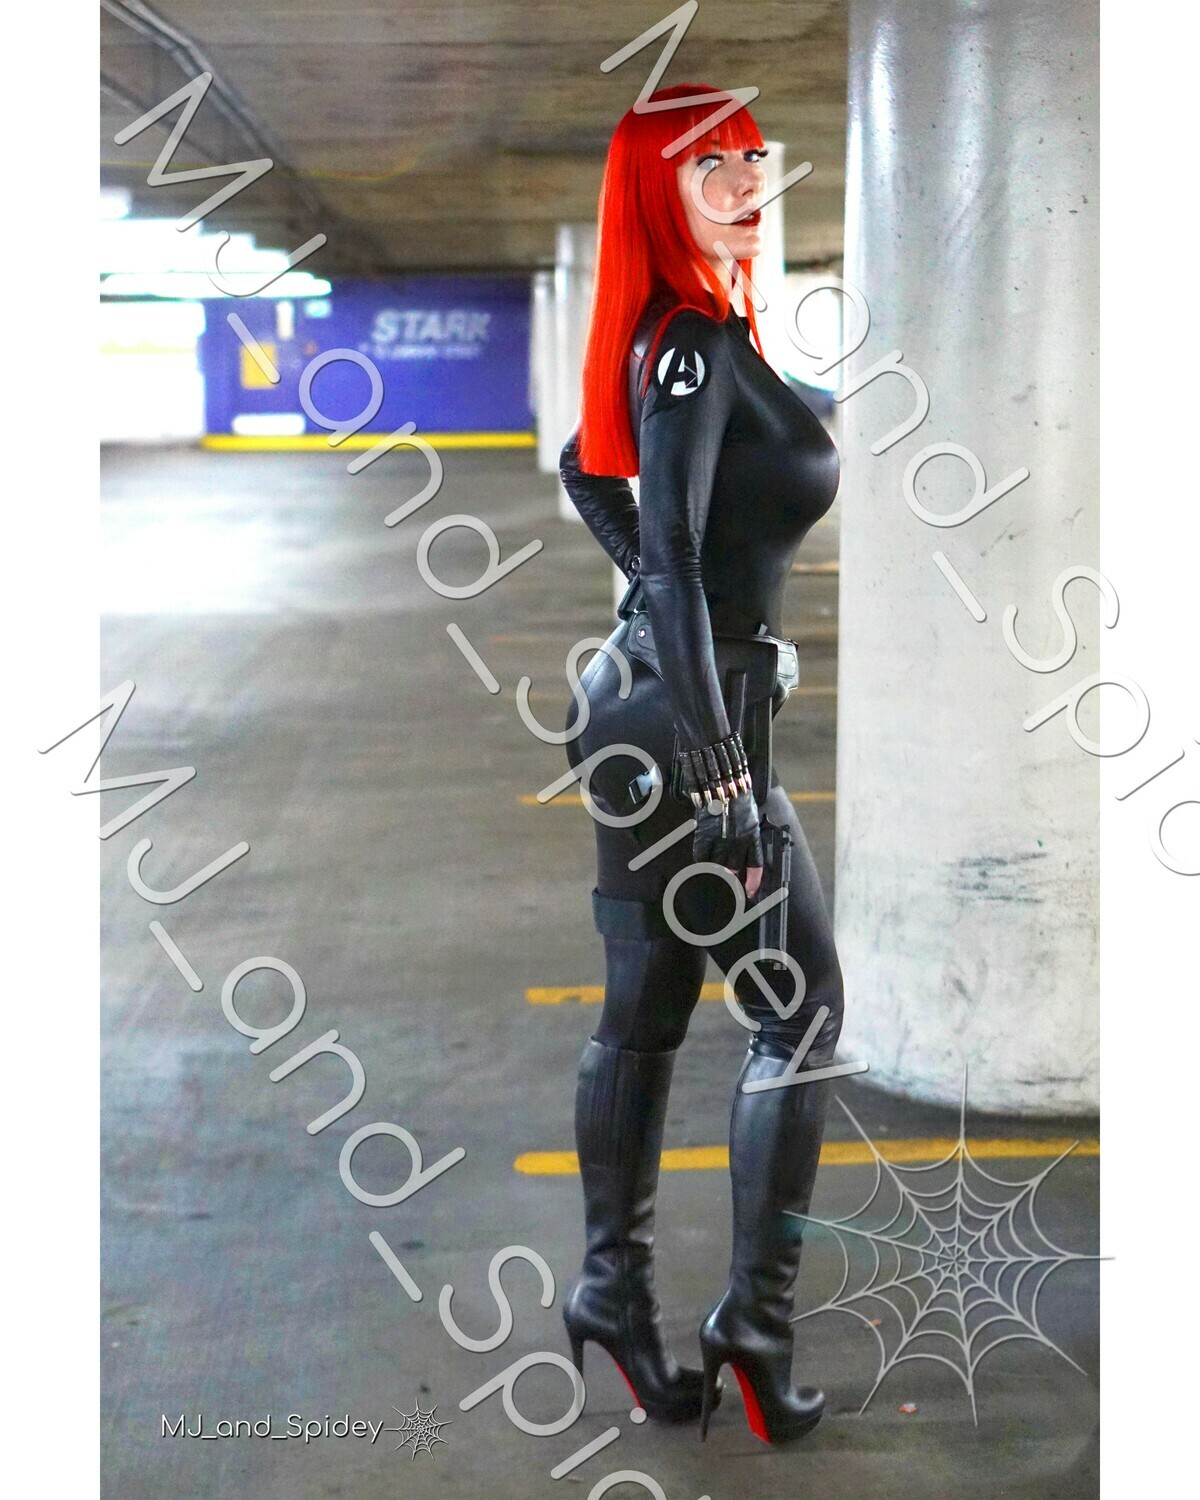 Marvel - Avengers - Black Widow 4 - Digital Cosplay Image (@MJ_and_Spidey, MJ and Spidey, Comics)